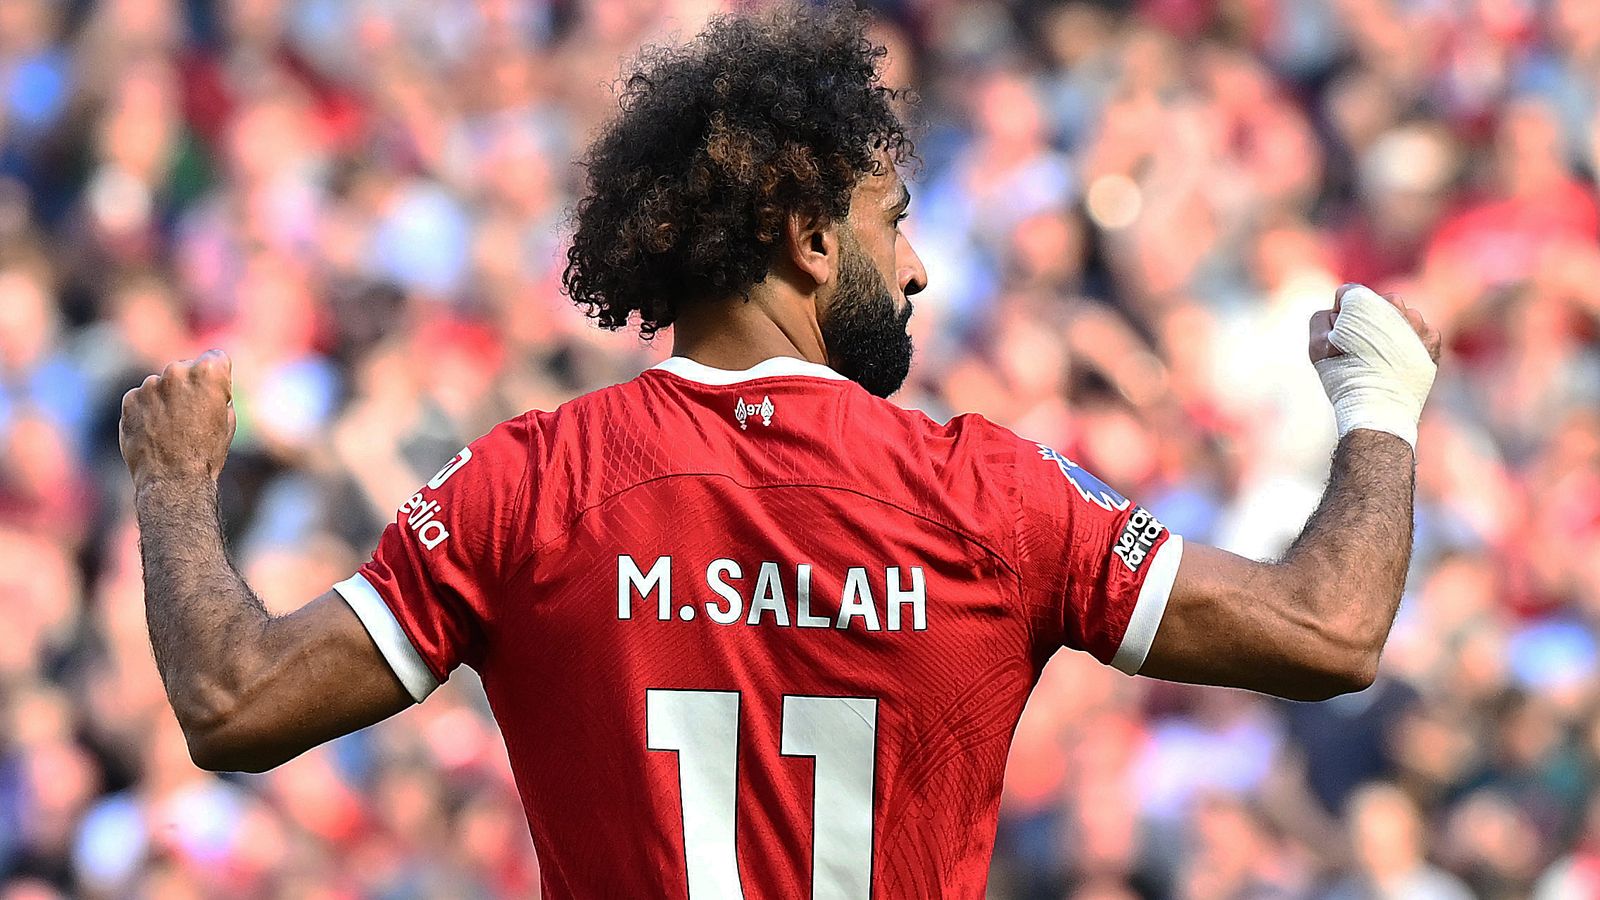 Liverpool icon, Mohamed Salah will be leaving the club come end of the season